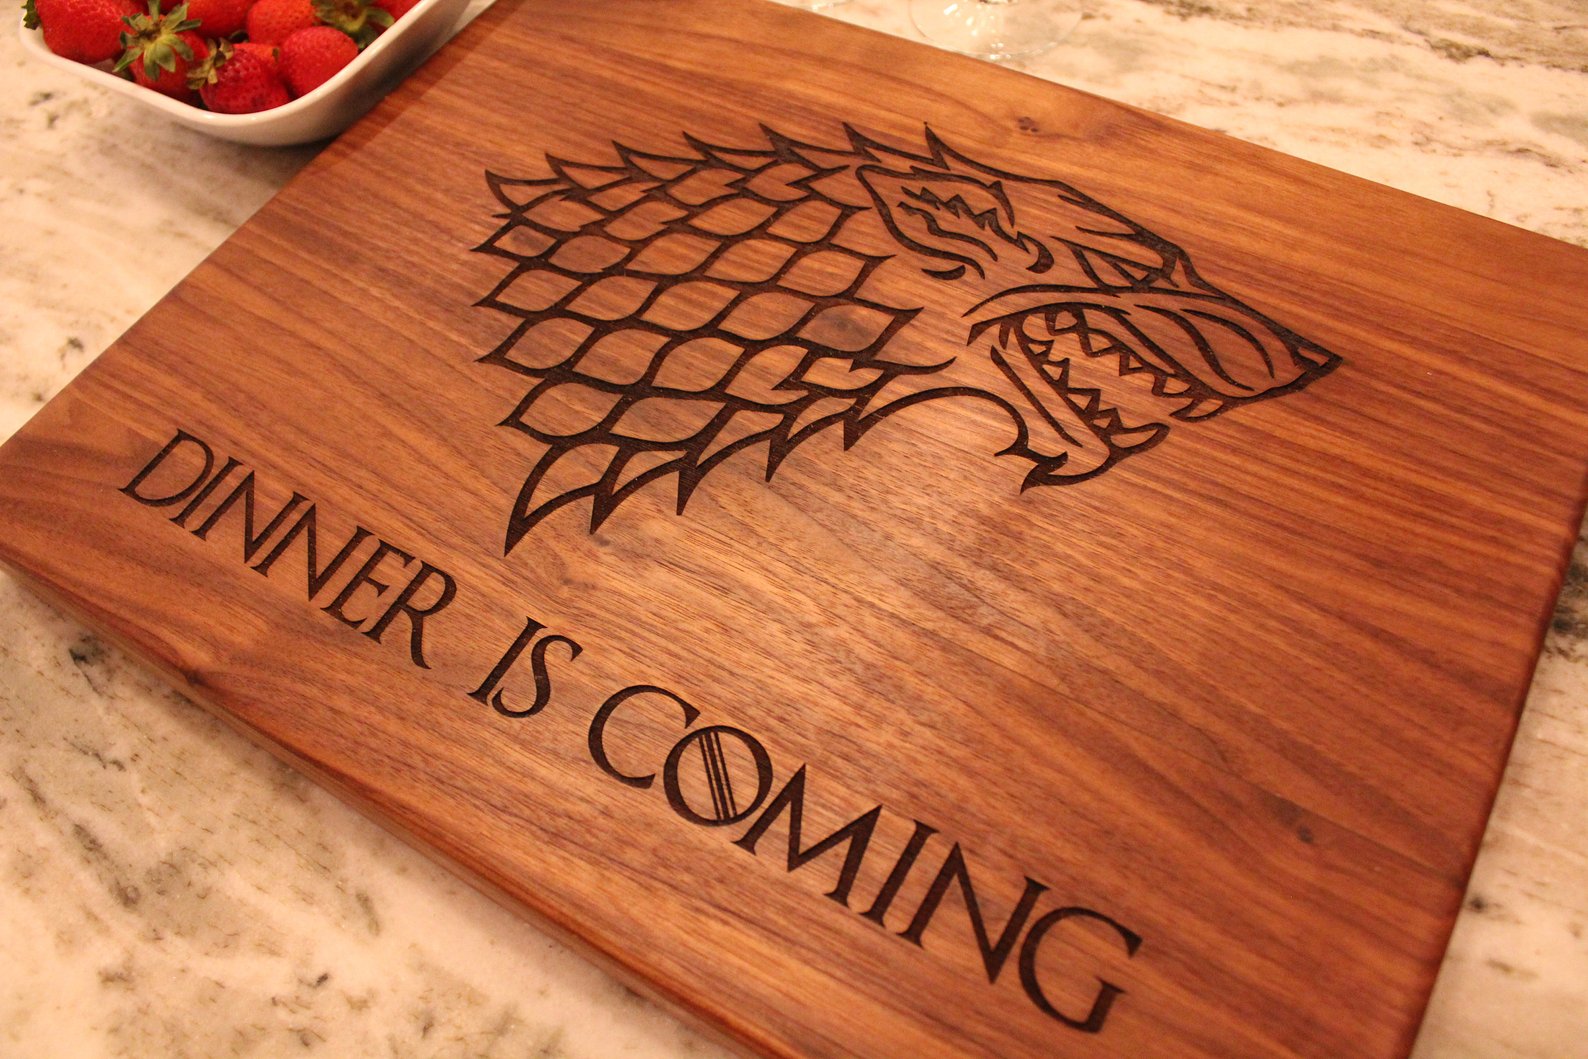 Game of Thrones cheeseboard